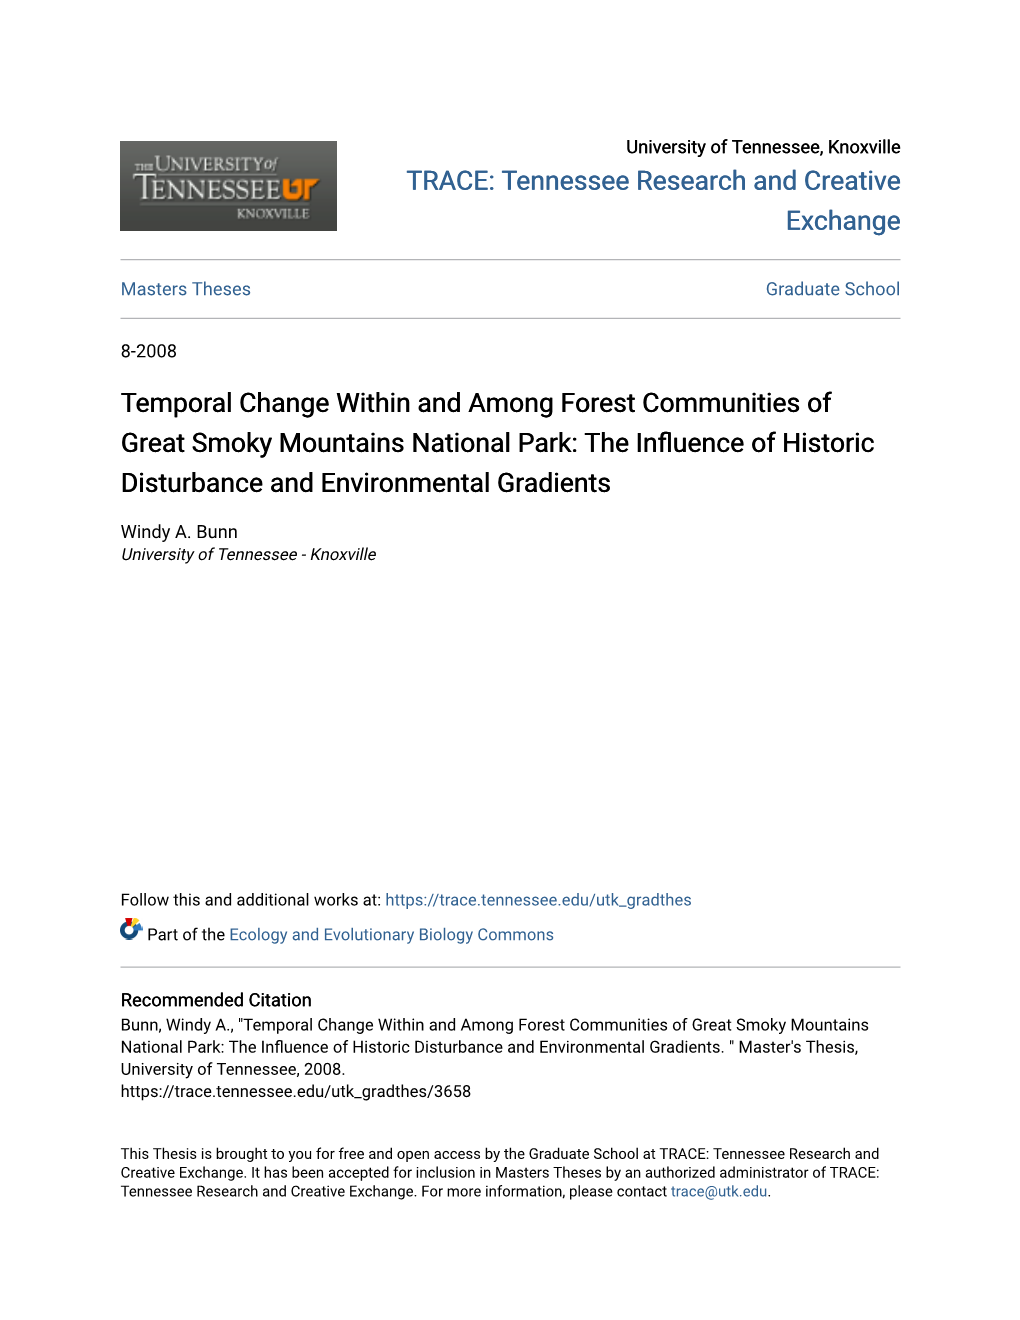 Temporal Change Within and Among Forest Communities of Great Smoky Mountains National Park: the Influence of Historic Disturbance and Environmental Gradients